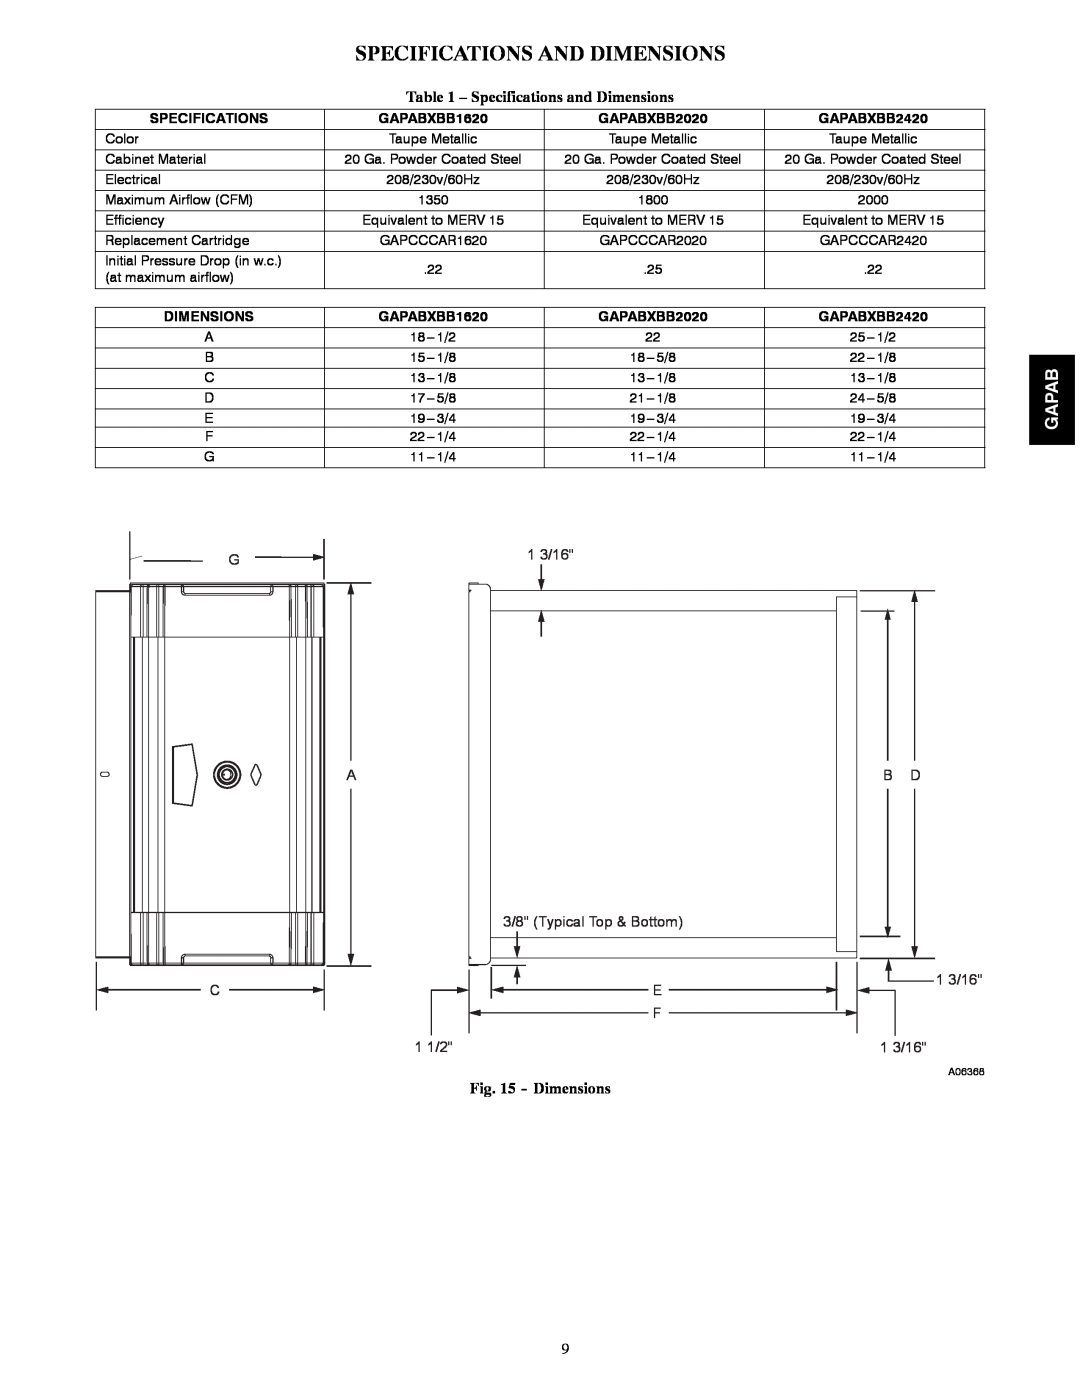 Bryant Specifications And Dimensions, Gapab, Specifications and Dimensions, GAPABXBB1620, GAPABXBB2020, GAPABXBB2420 